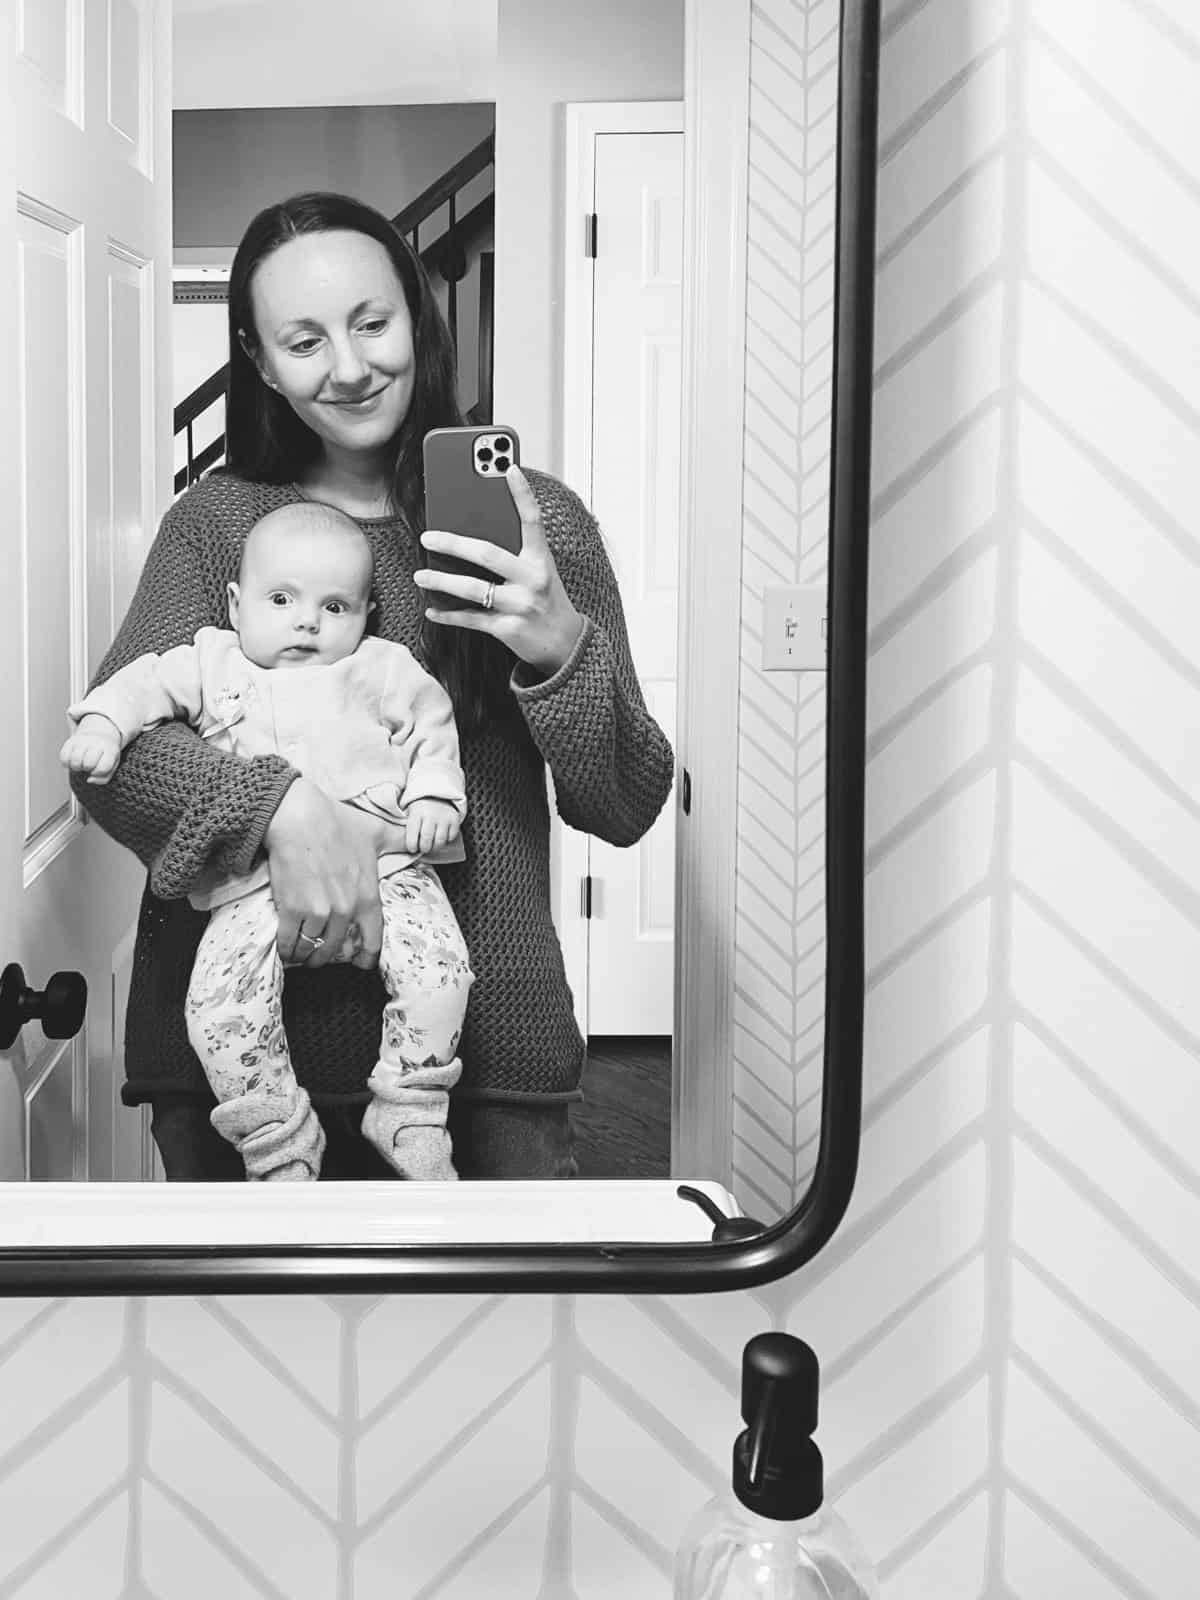 Lindsay holding her new baby taking a photo in the mirror.